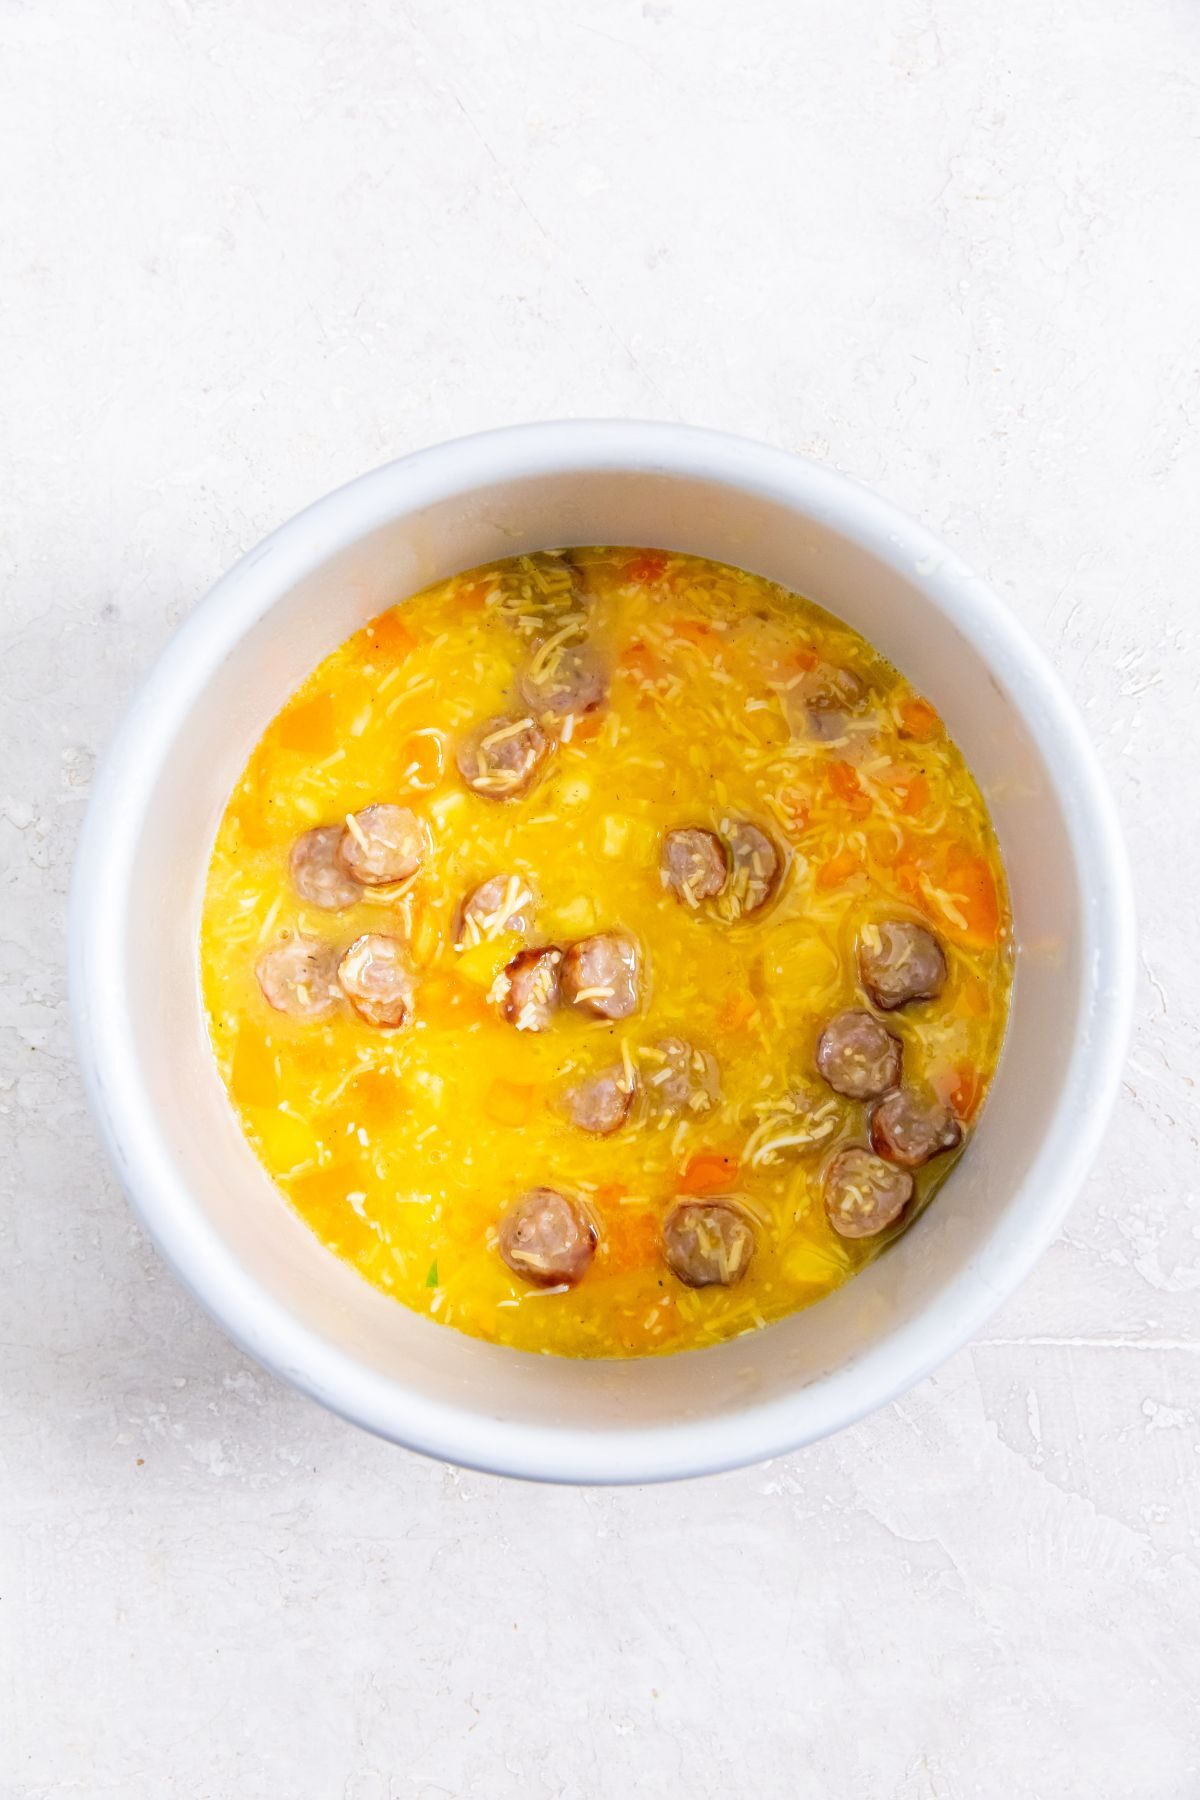 mixed eggs with sausage, cheese and bell peppers in a baking pan